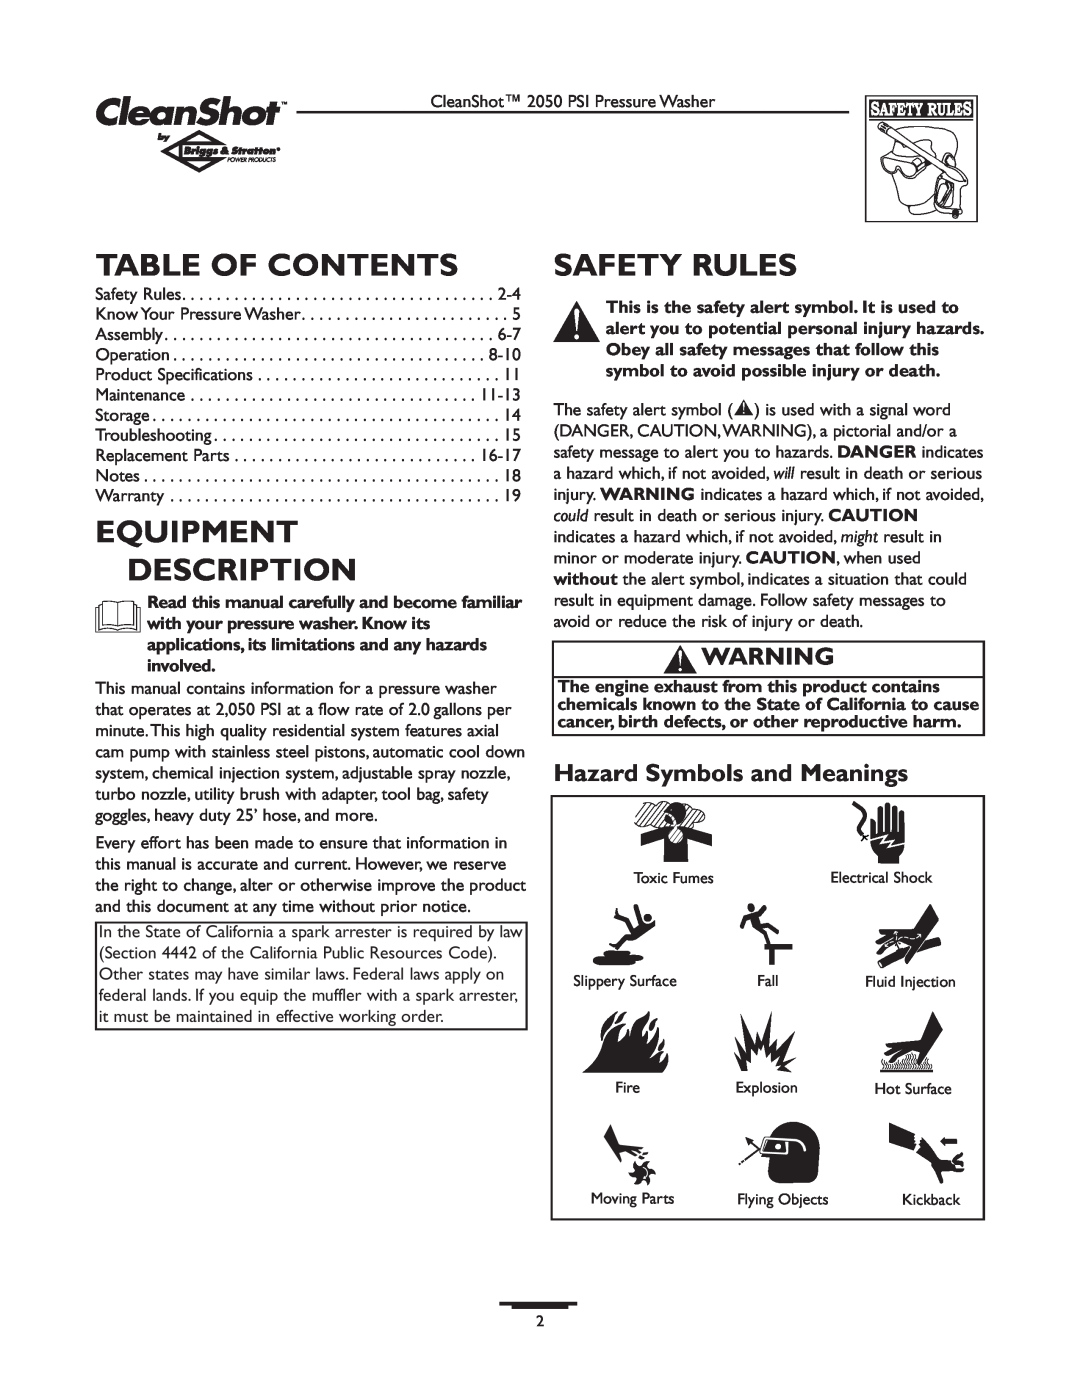 Briggs & Stratton 2050PSI owner manual Table Of Contents, Equipment Description, Safety Rules, Hazard Symbols and Meanings 